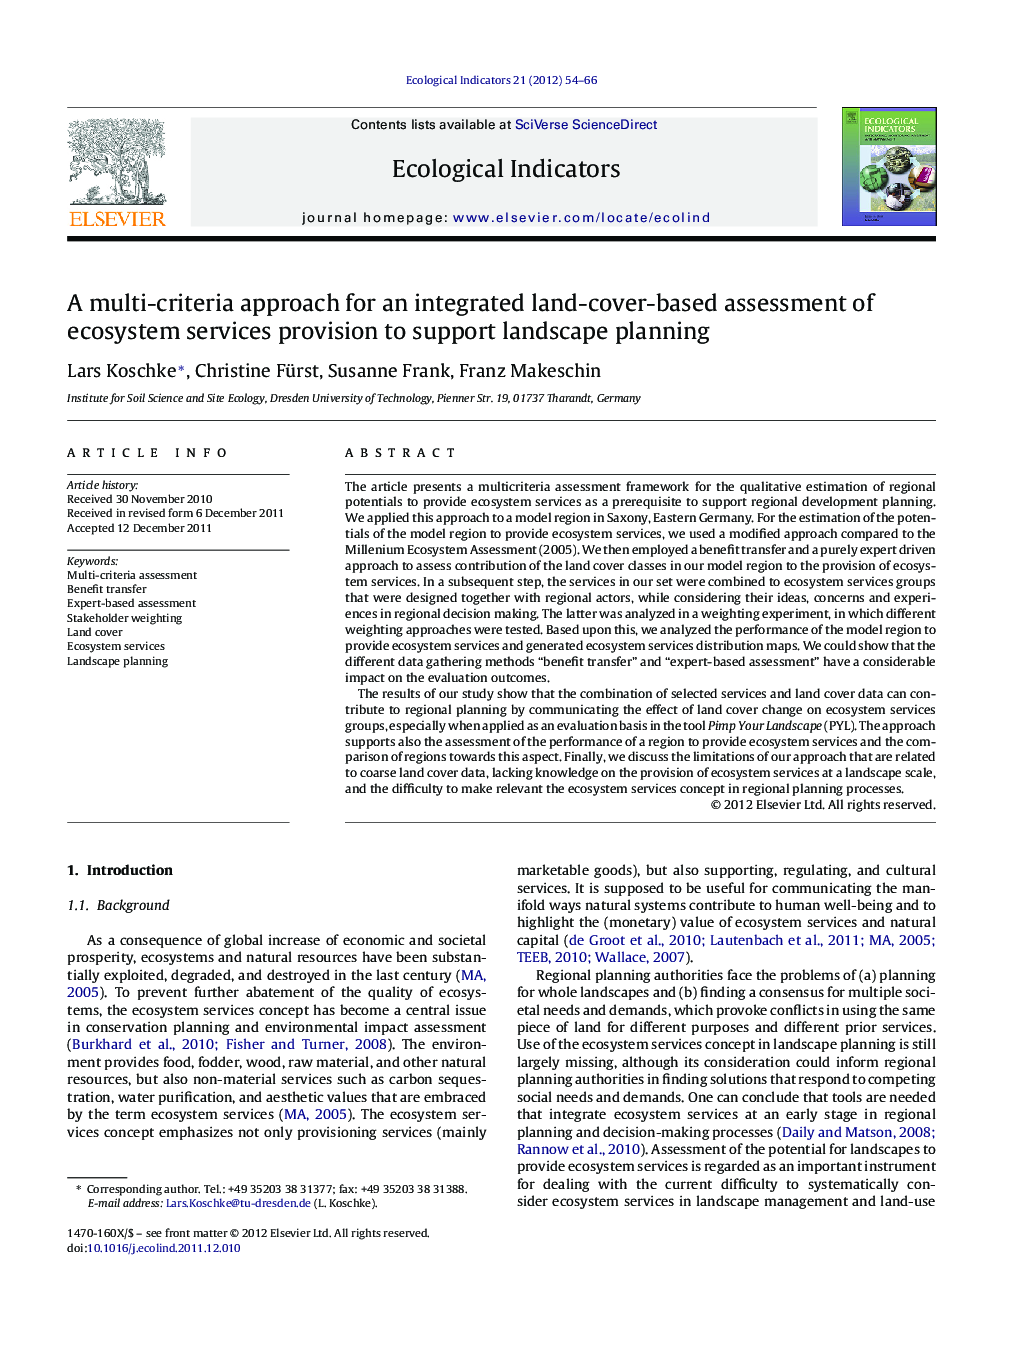 A multi-criteria approach for an integrated land-cover-based assessment of ecosystem services provision to support landscape planning